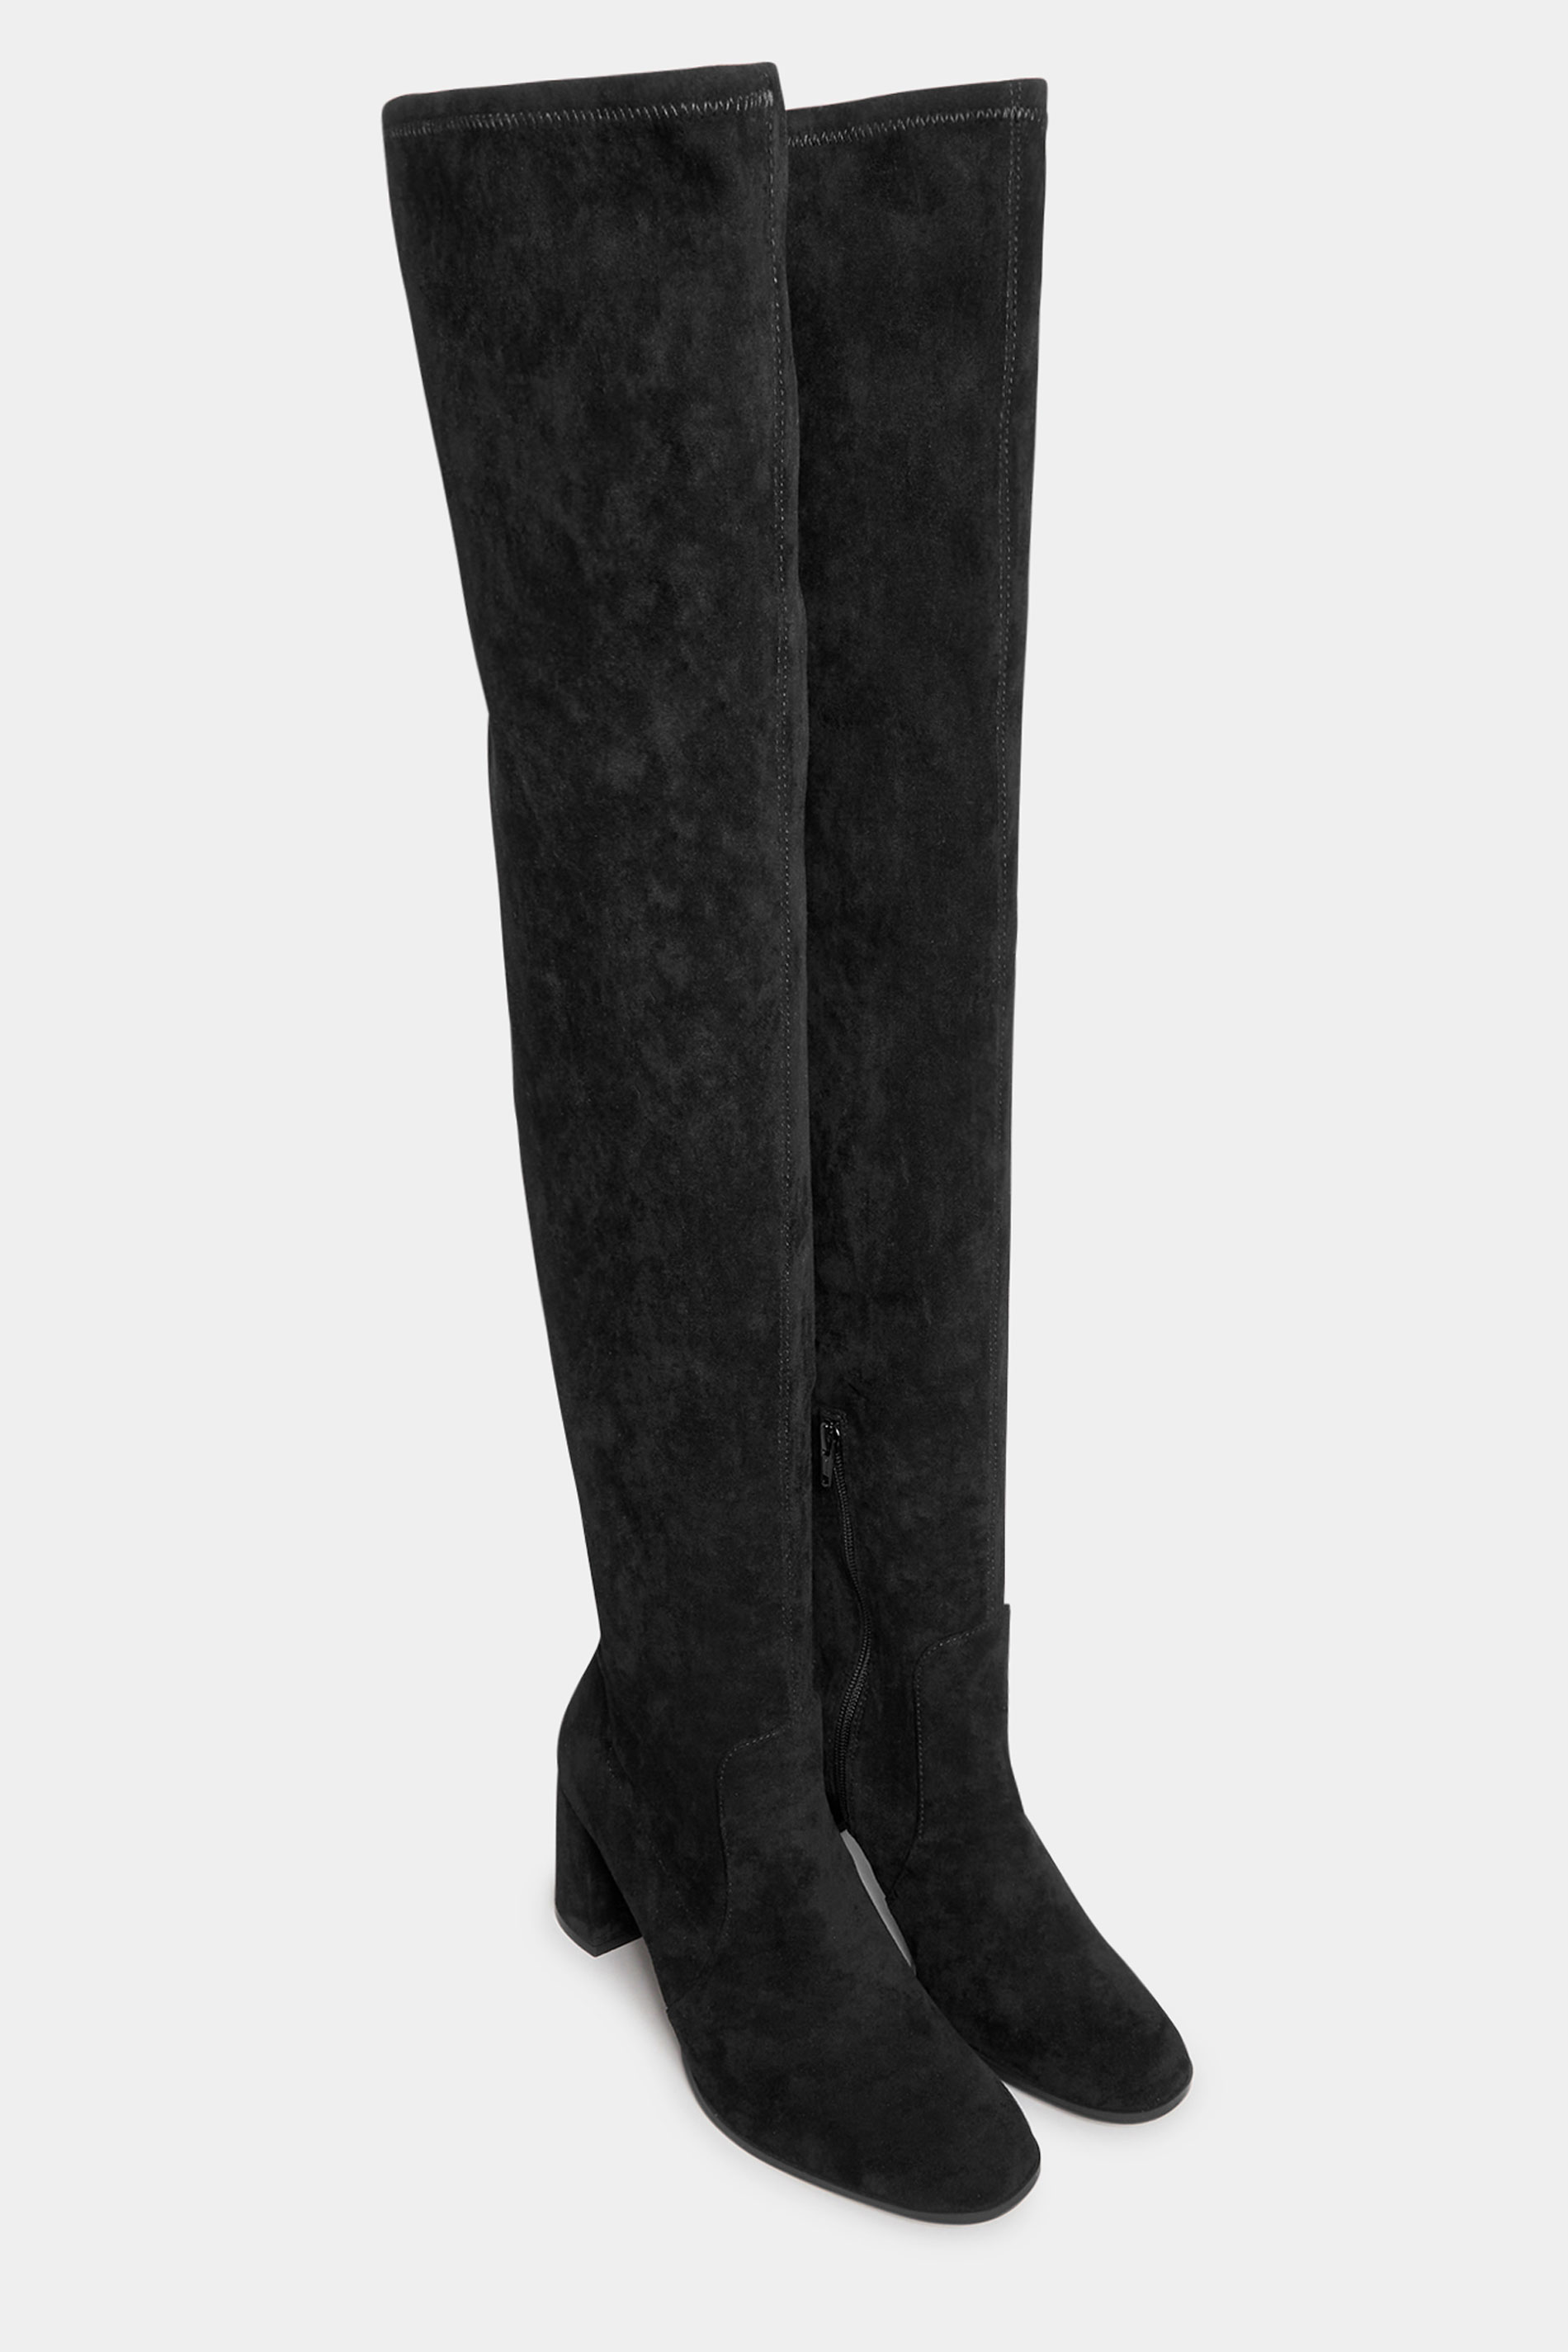 LTS Black Suede Heeled Over The Knee Boots In Standard Fit | Long Tall Sally 2